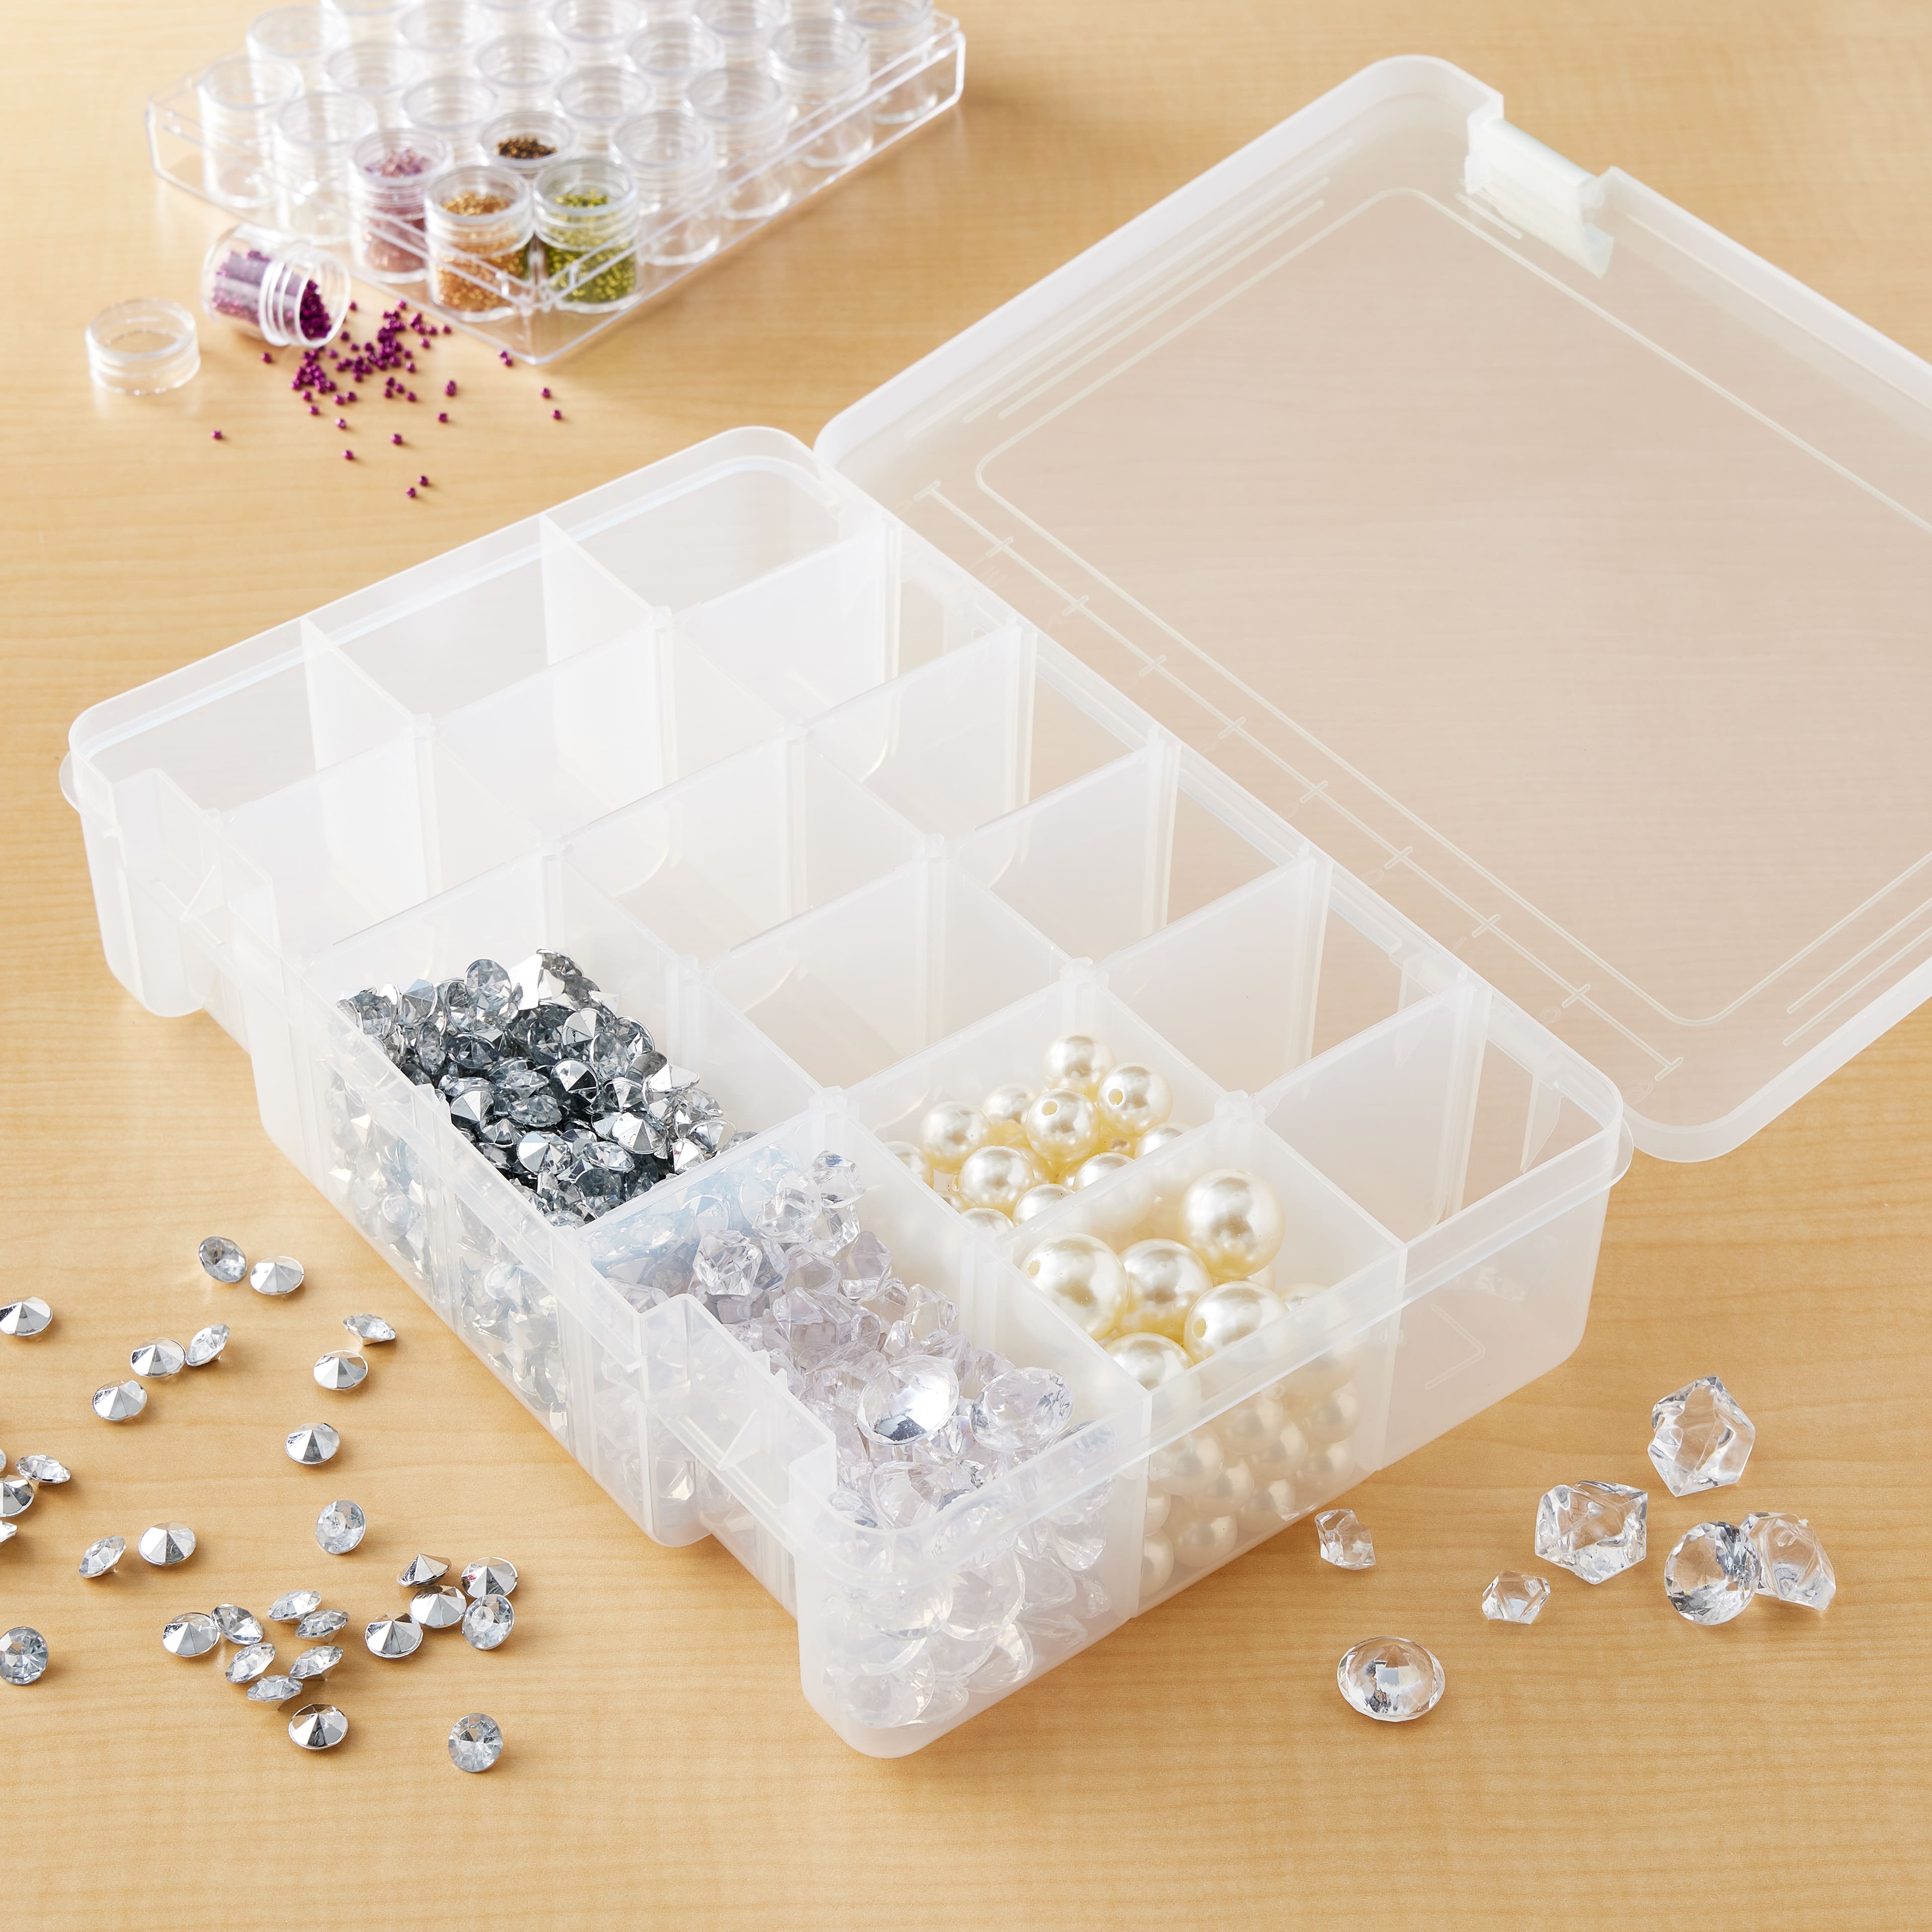 HOT Deals on Plastic Organizers at Michaels!